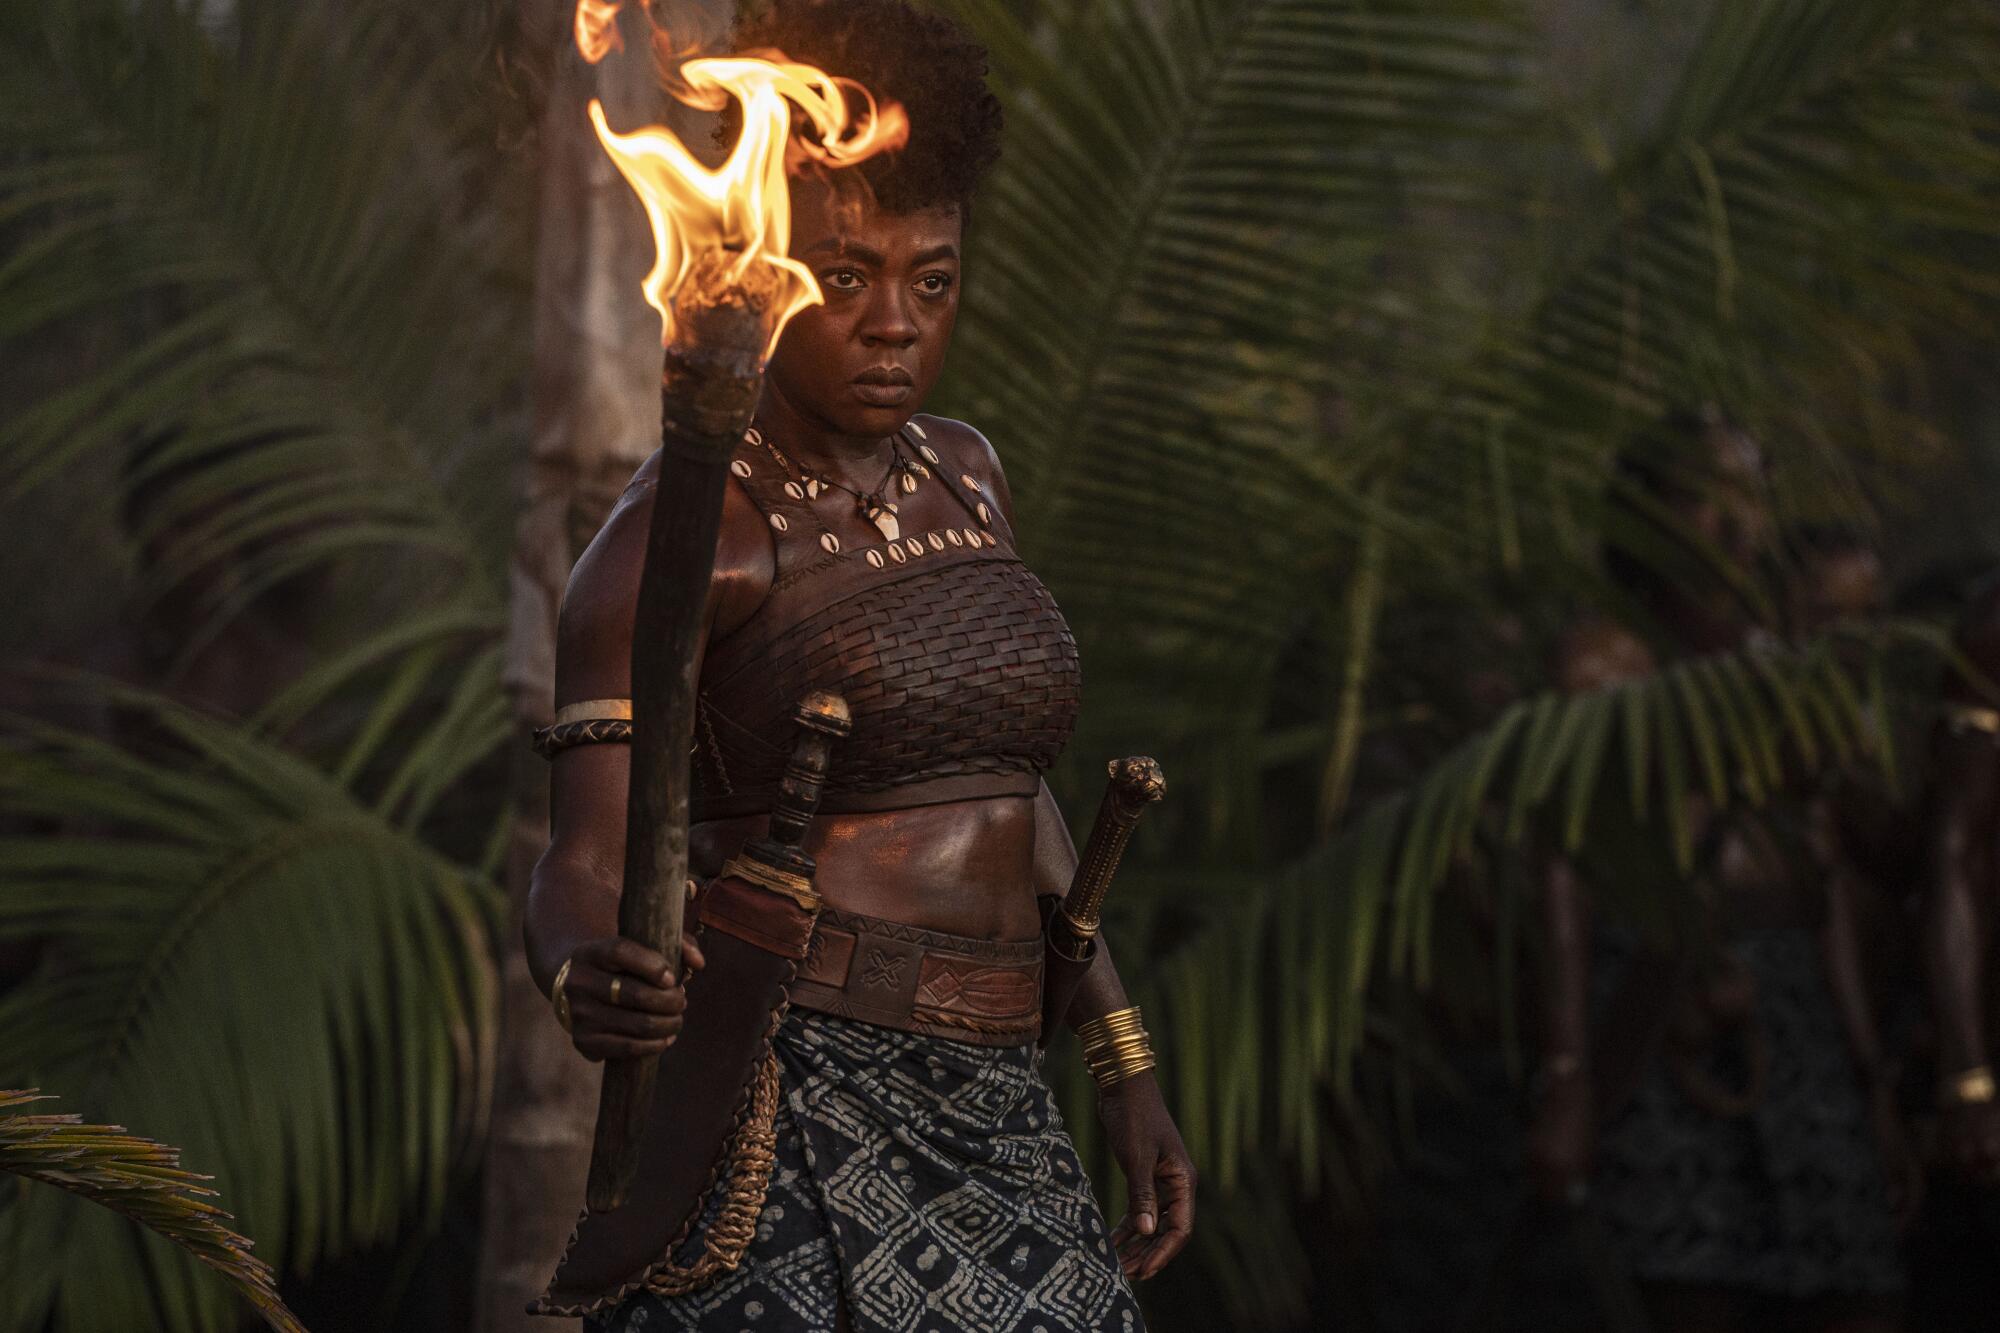 A woman warrior stands amid foliage holding a torch in a scene from "The Woman King."